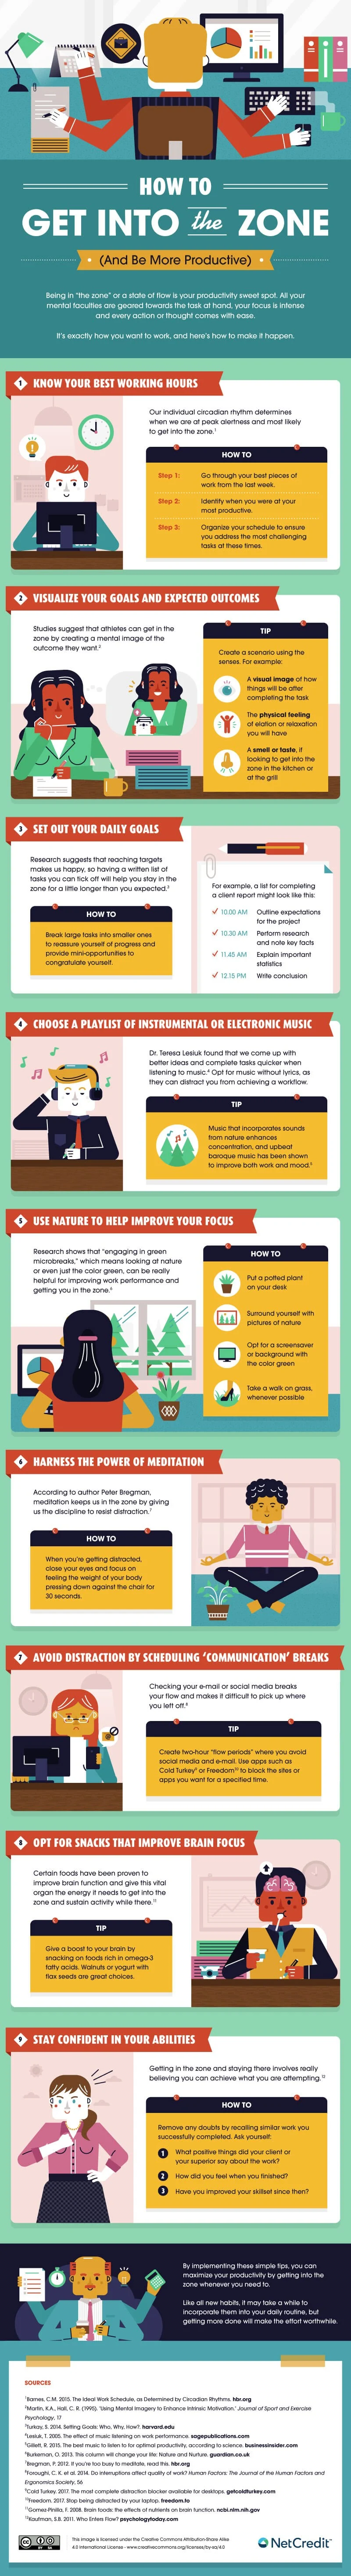 How to Get in the Zone and be More Productive - #Infographic